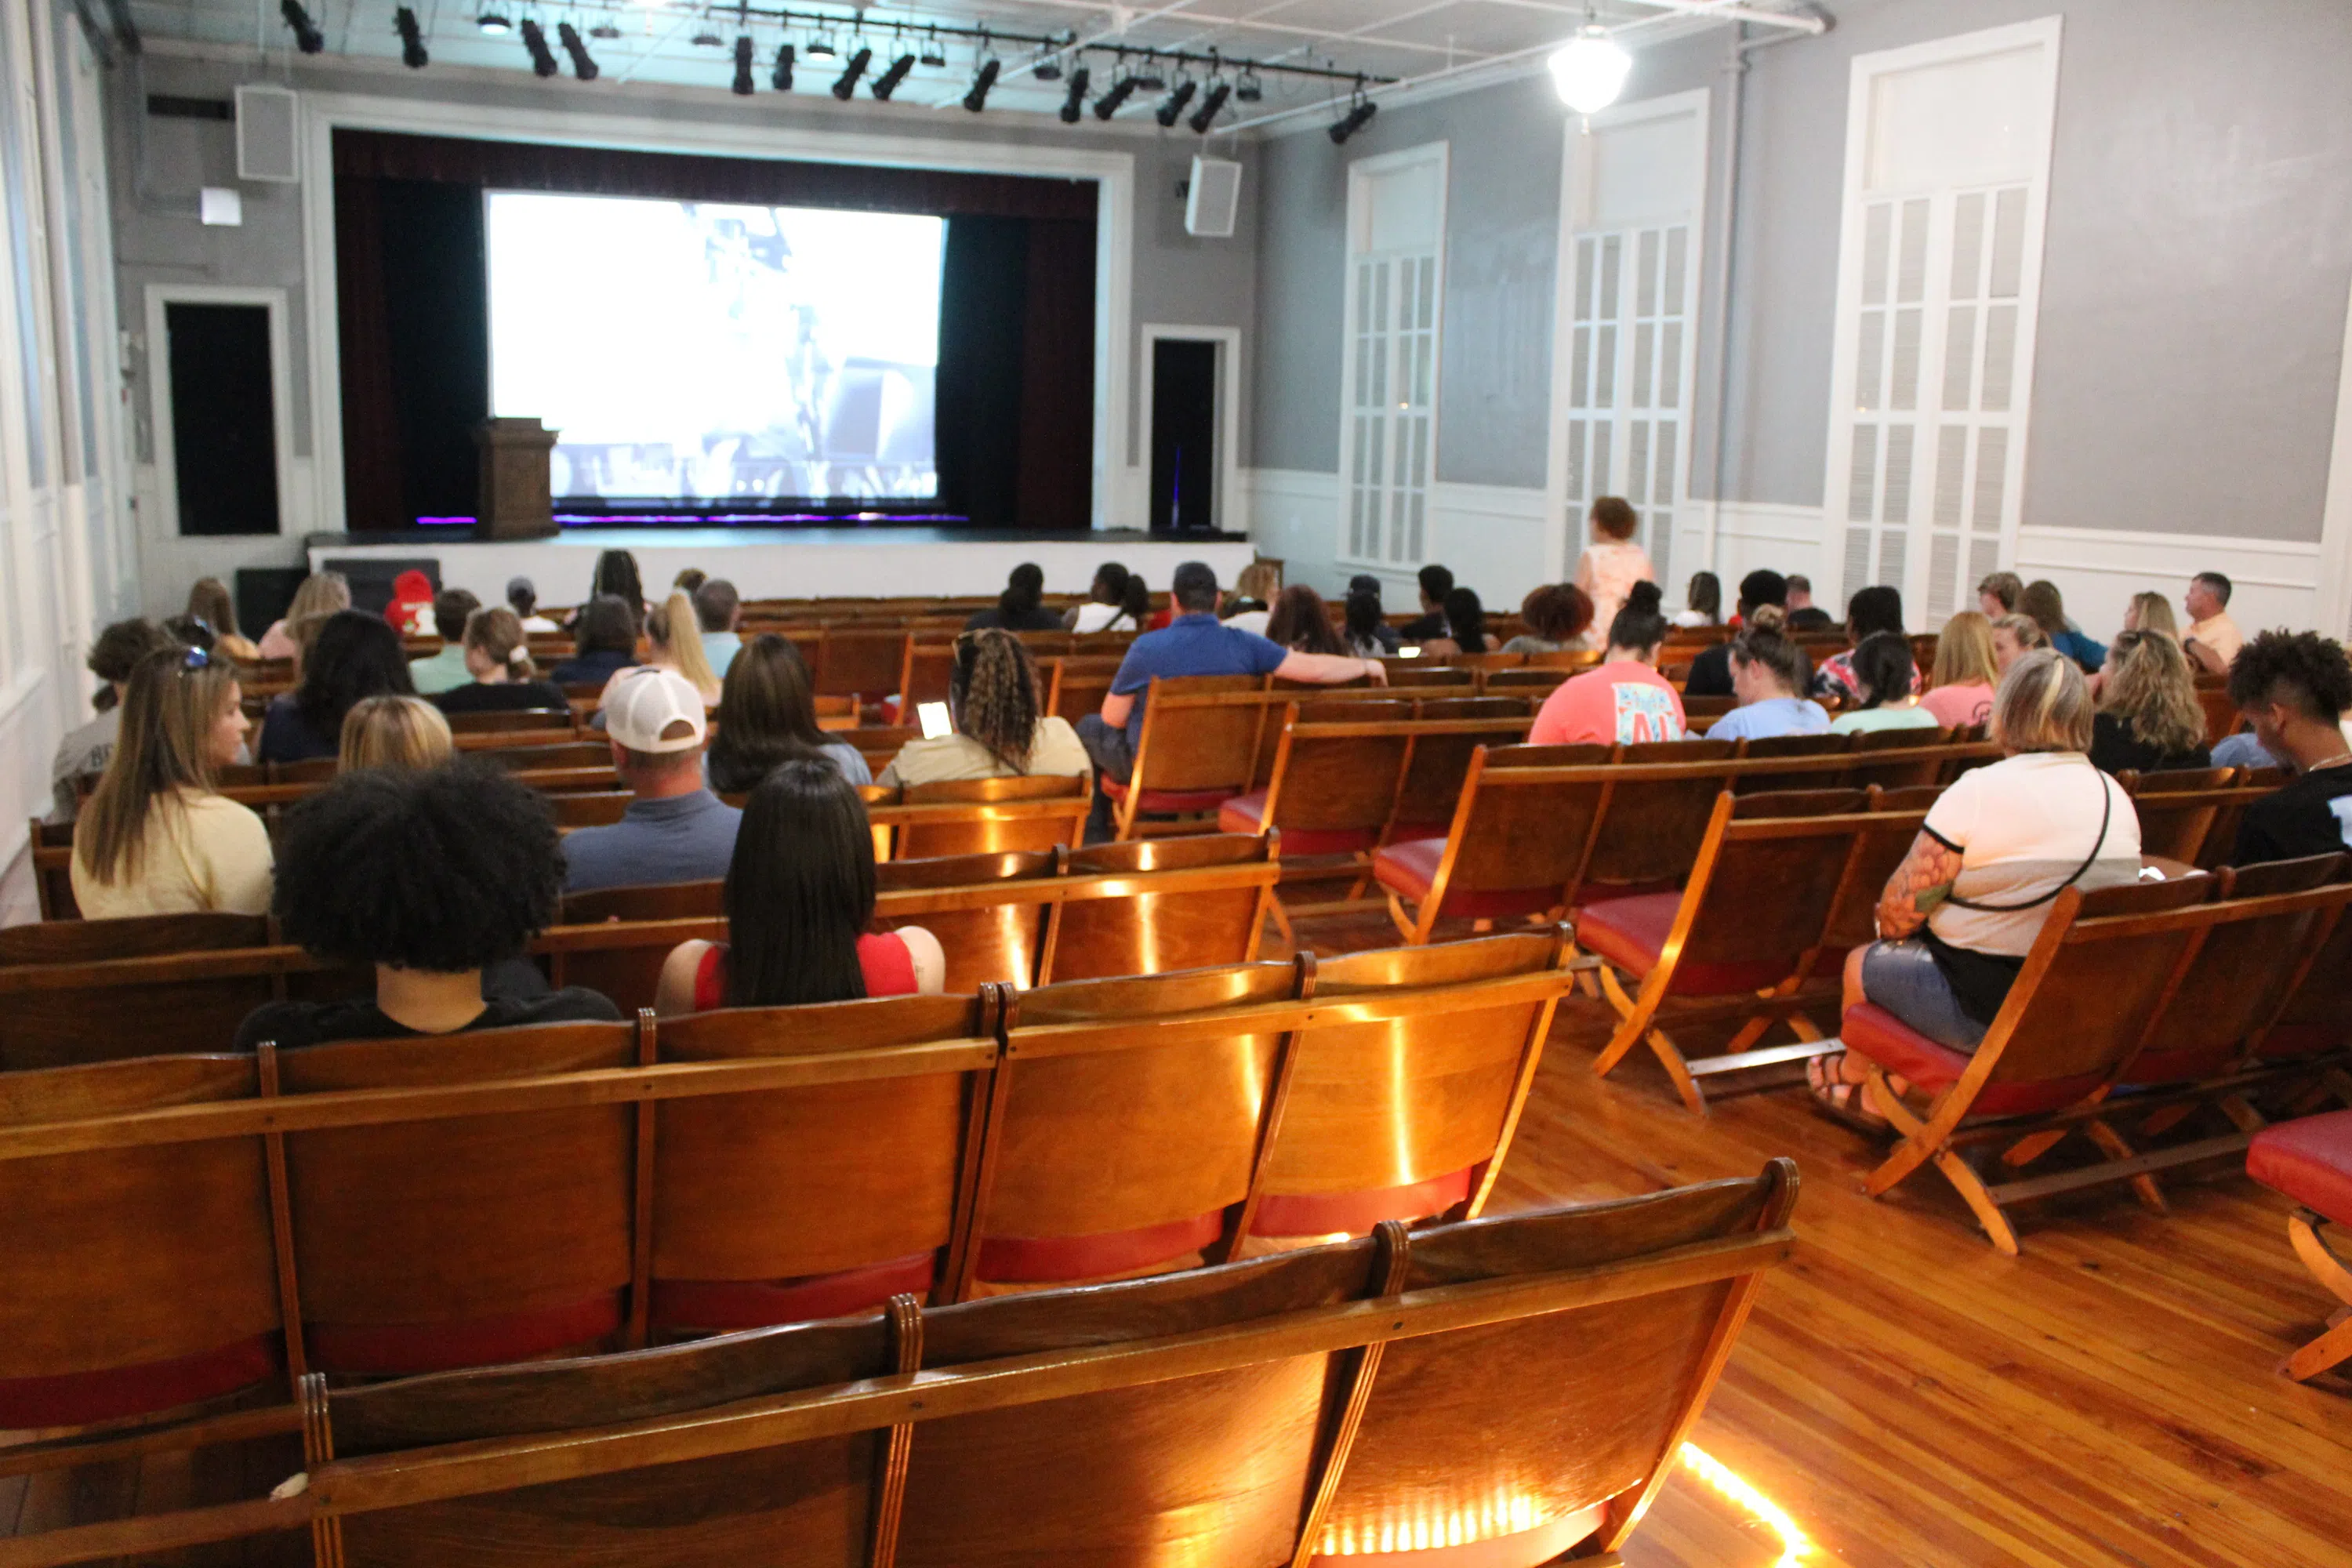 Students and parents attend an orientation event in the theatre at Old Main.